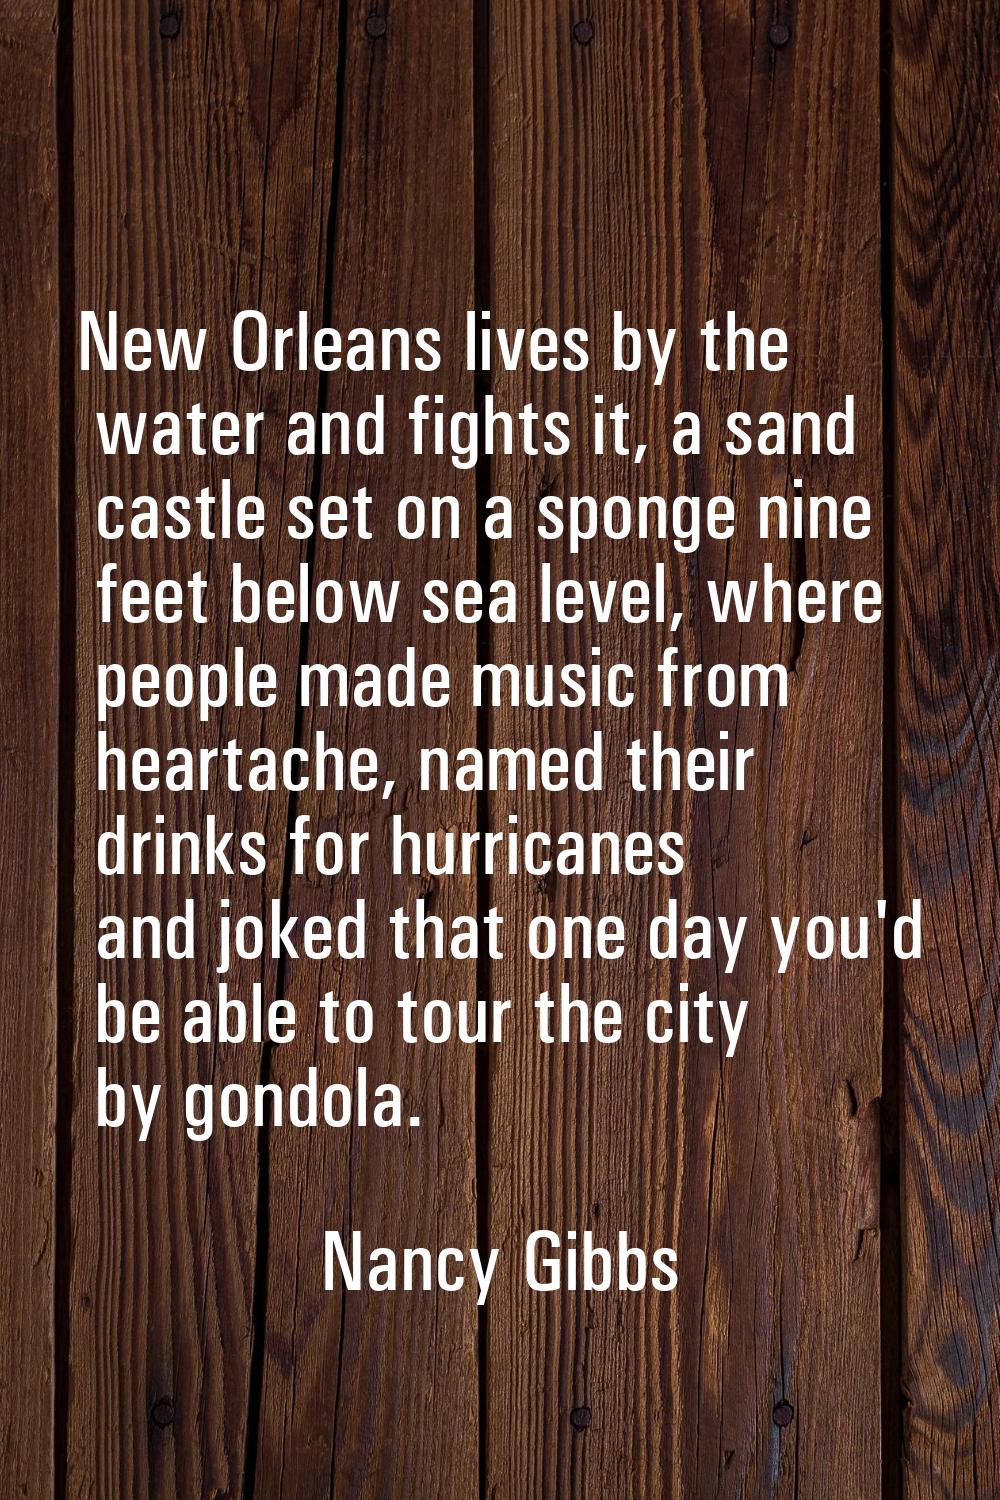 New Orleans lives by the water and fights it, a sand castle set on a sponge nine feet below sea lev